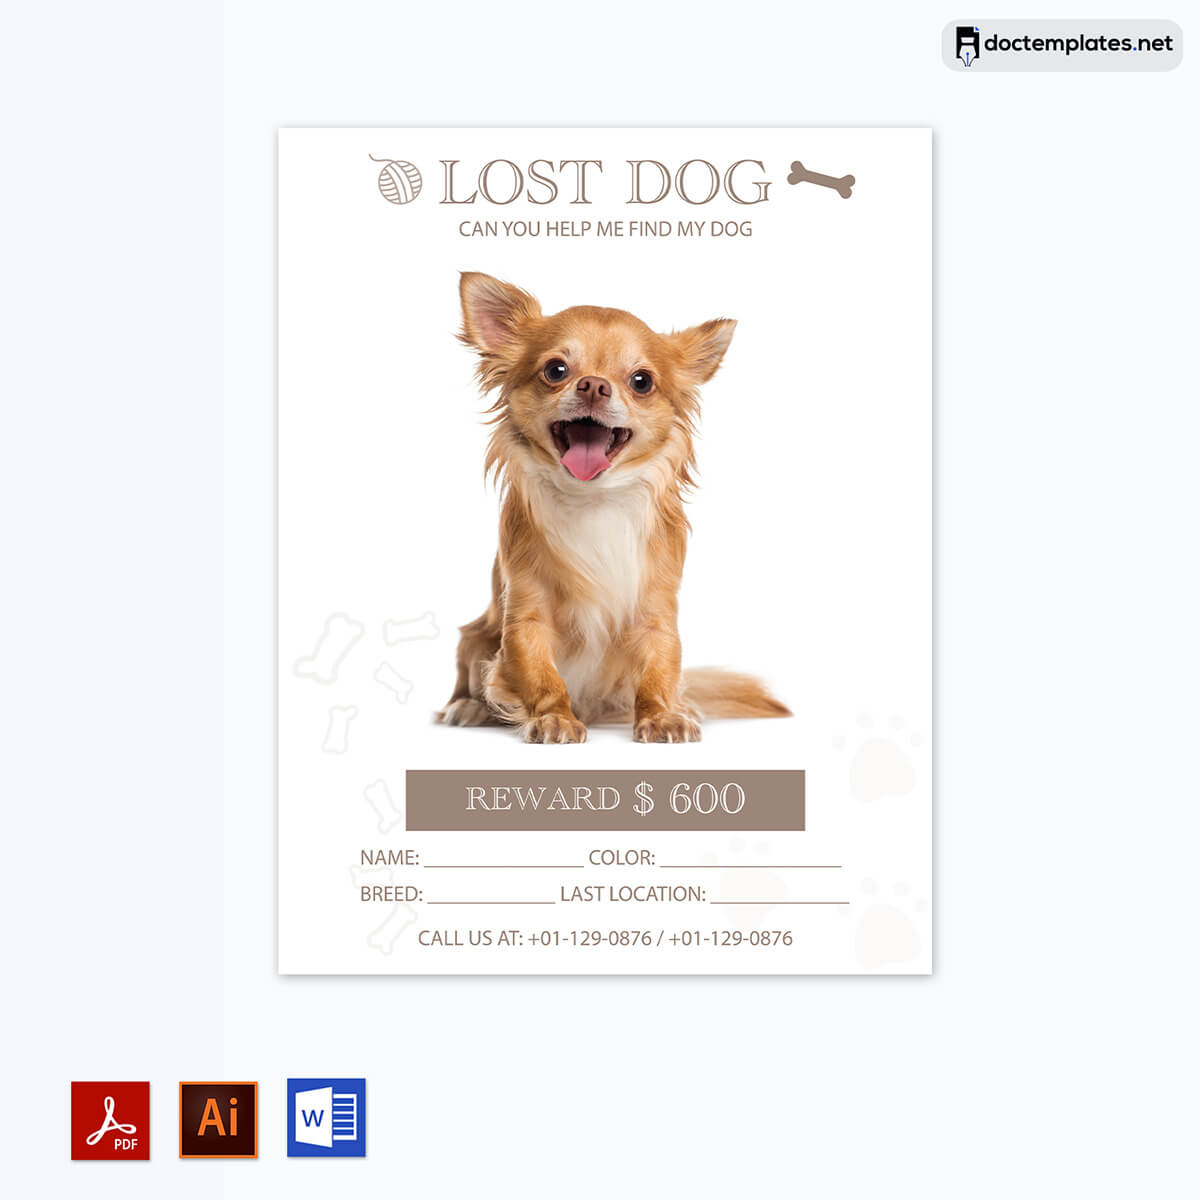 "Easy-to-Use Template" - Design a lost pet flyer quickly and effortlessly with this user-friendly template.